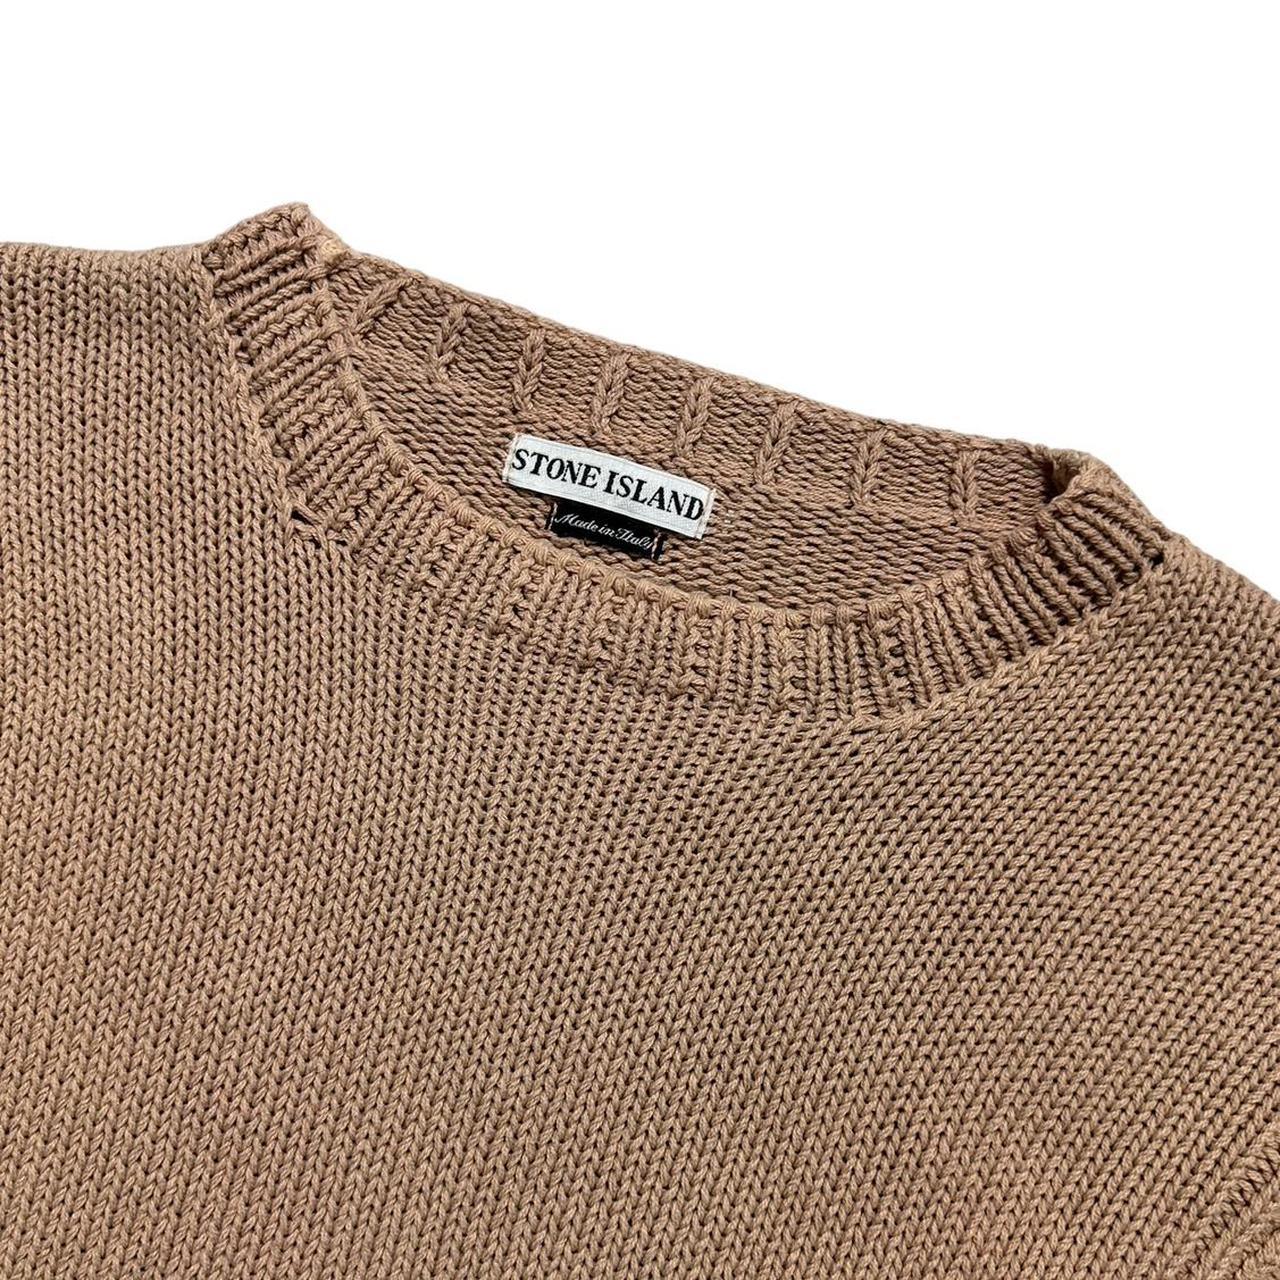 Stone Island Peach Heavy Knit Pullover Jumper - Known Source